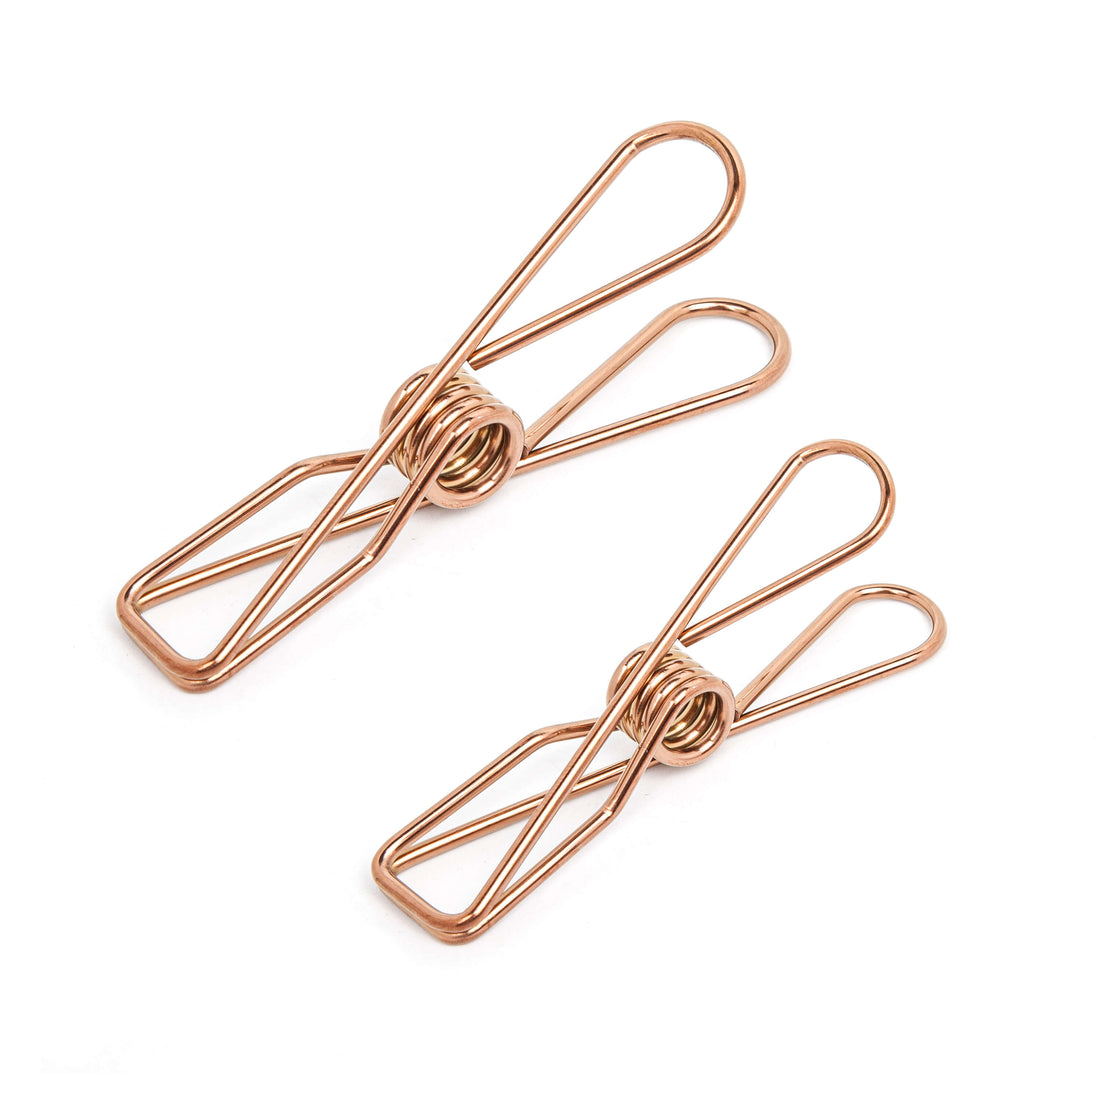 6PCS Sample Pack Rose Gold Stainless Clothing Pegs - EcoLuxe Living